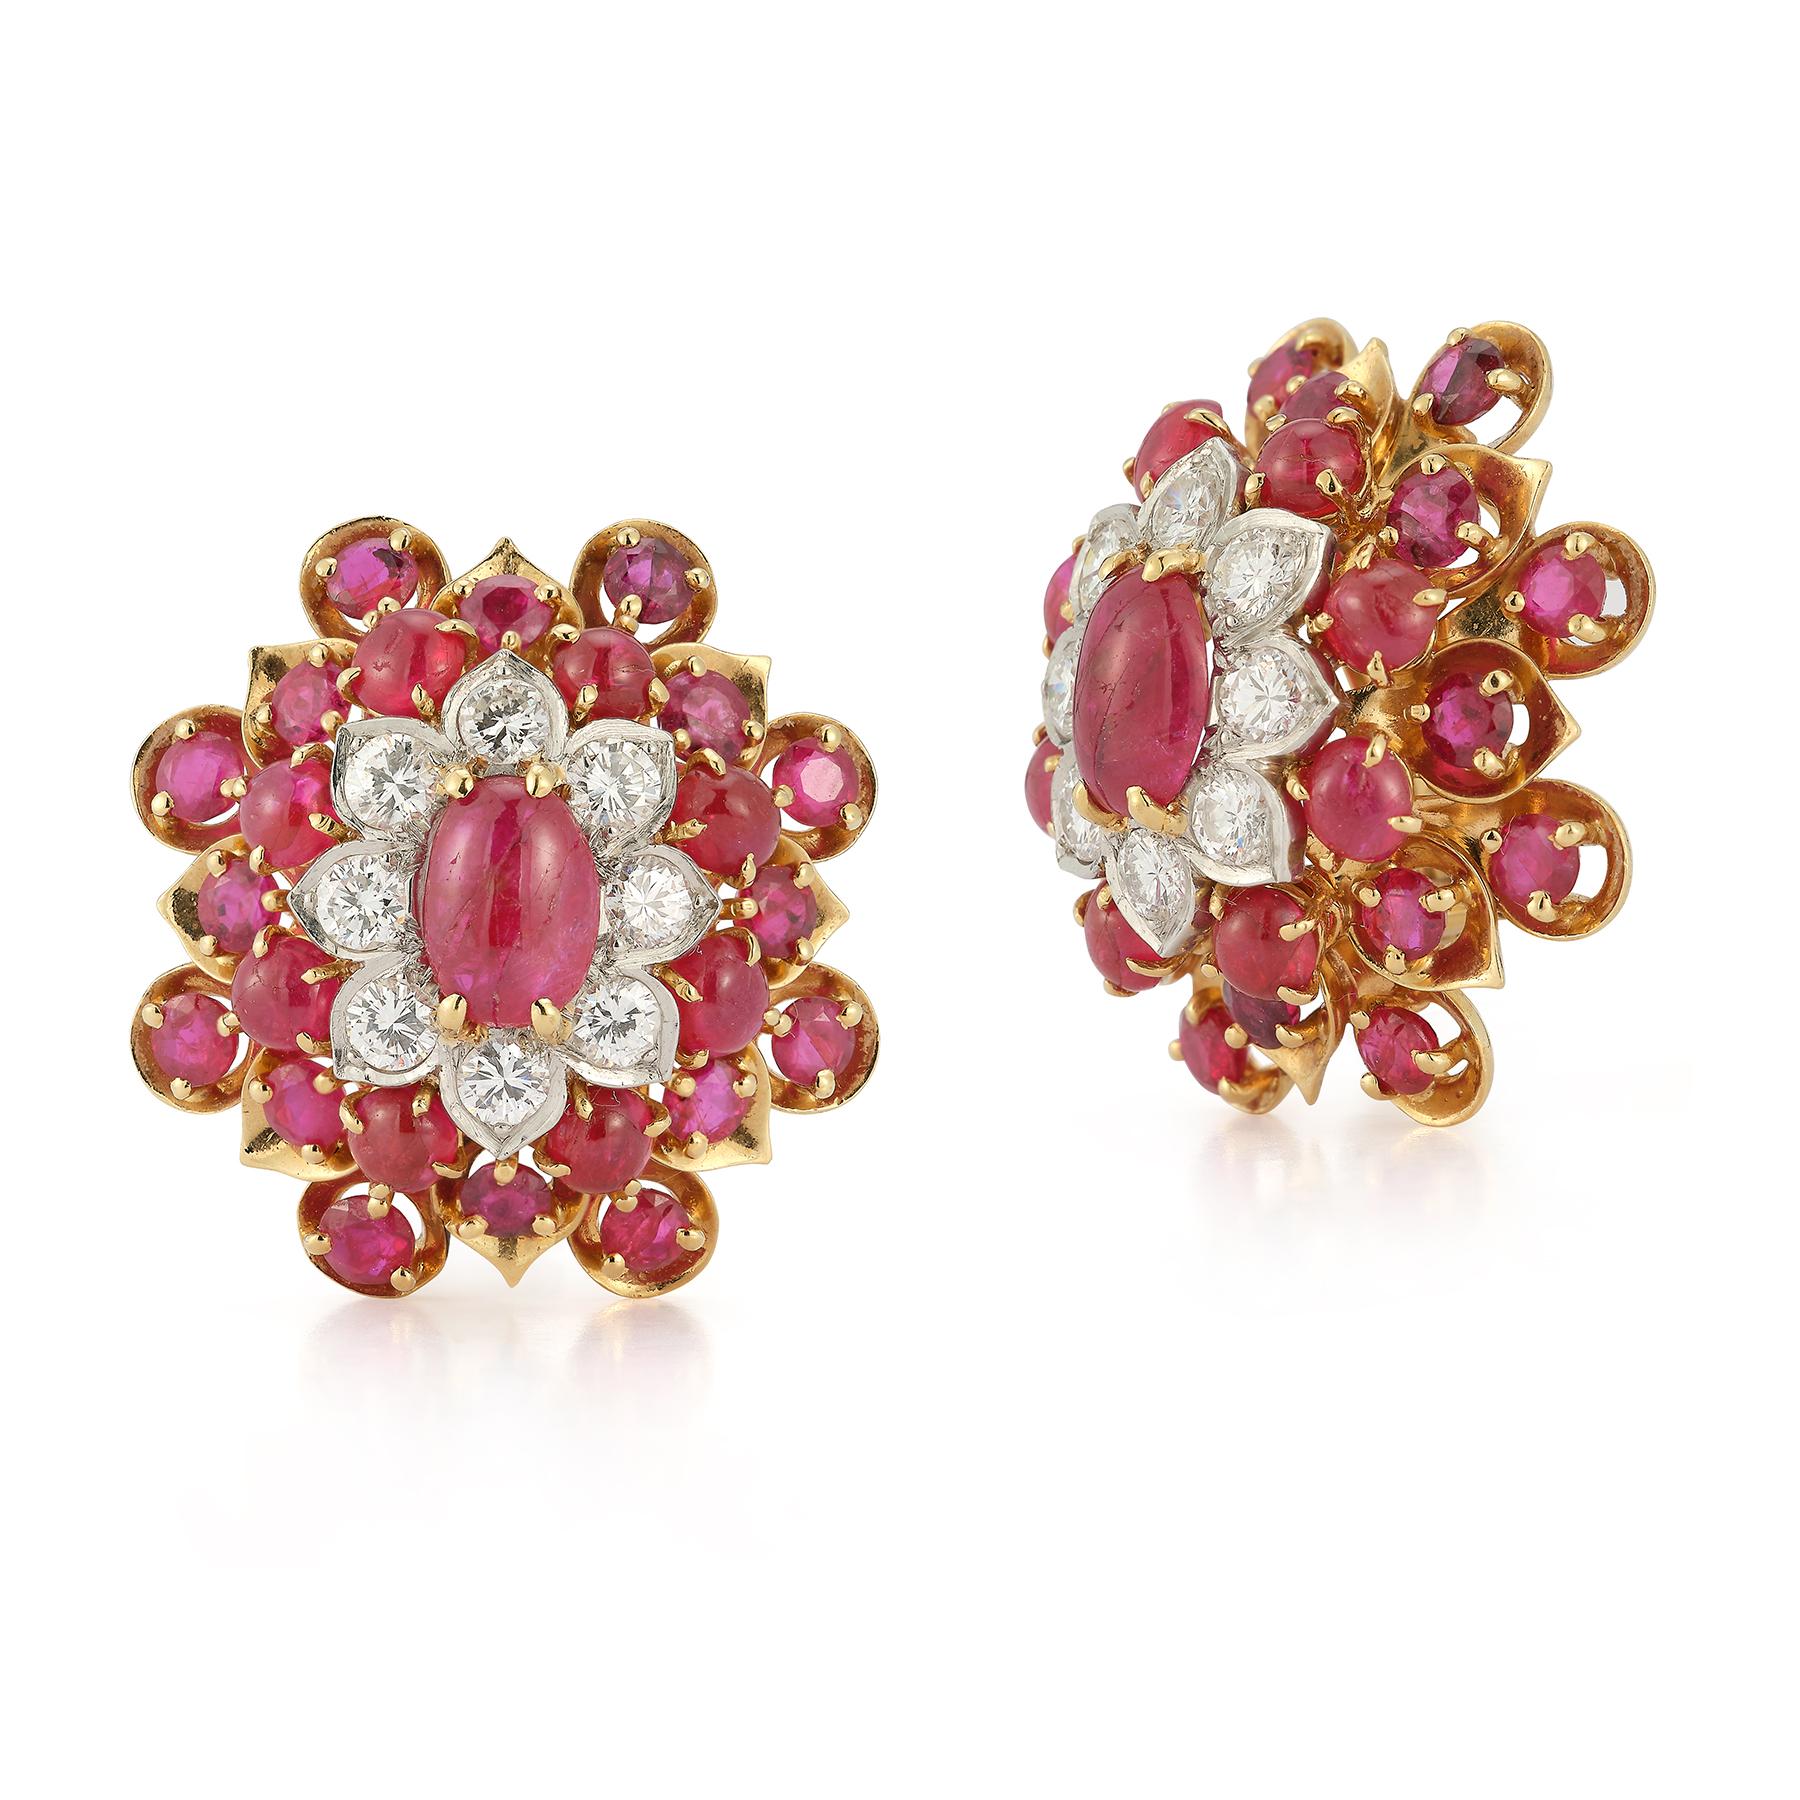 David Webb Ruby Earrings

Cabochon  center ruby surrounded by round cut diamonds & cabochon rubies forming a flower motif set in 18k yellow gold & platinum.

Measurements: 1